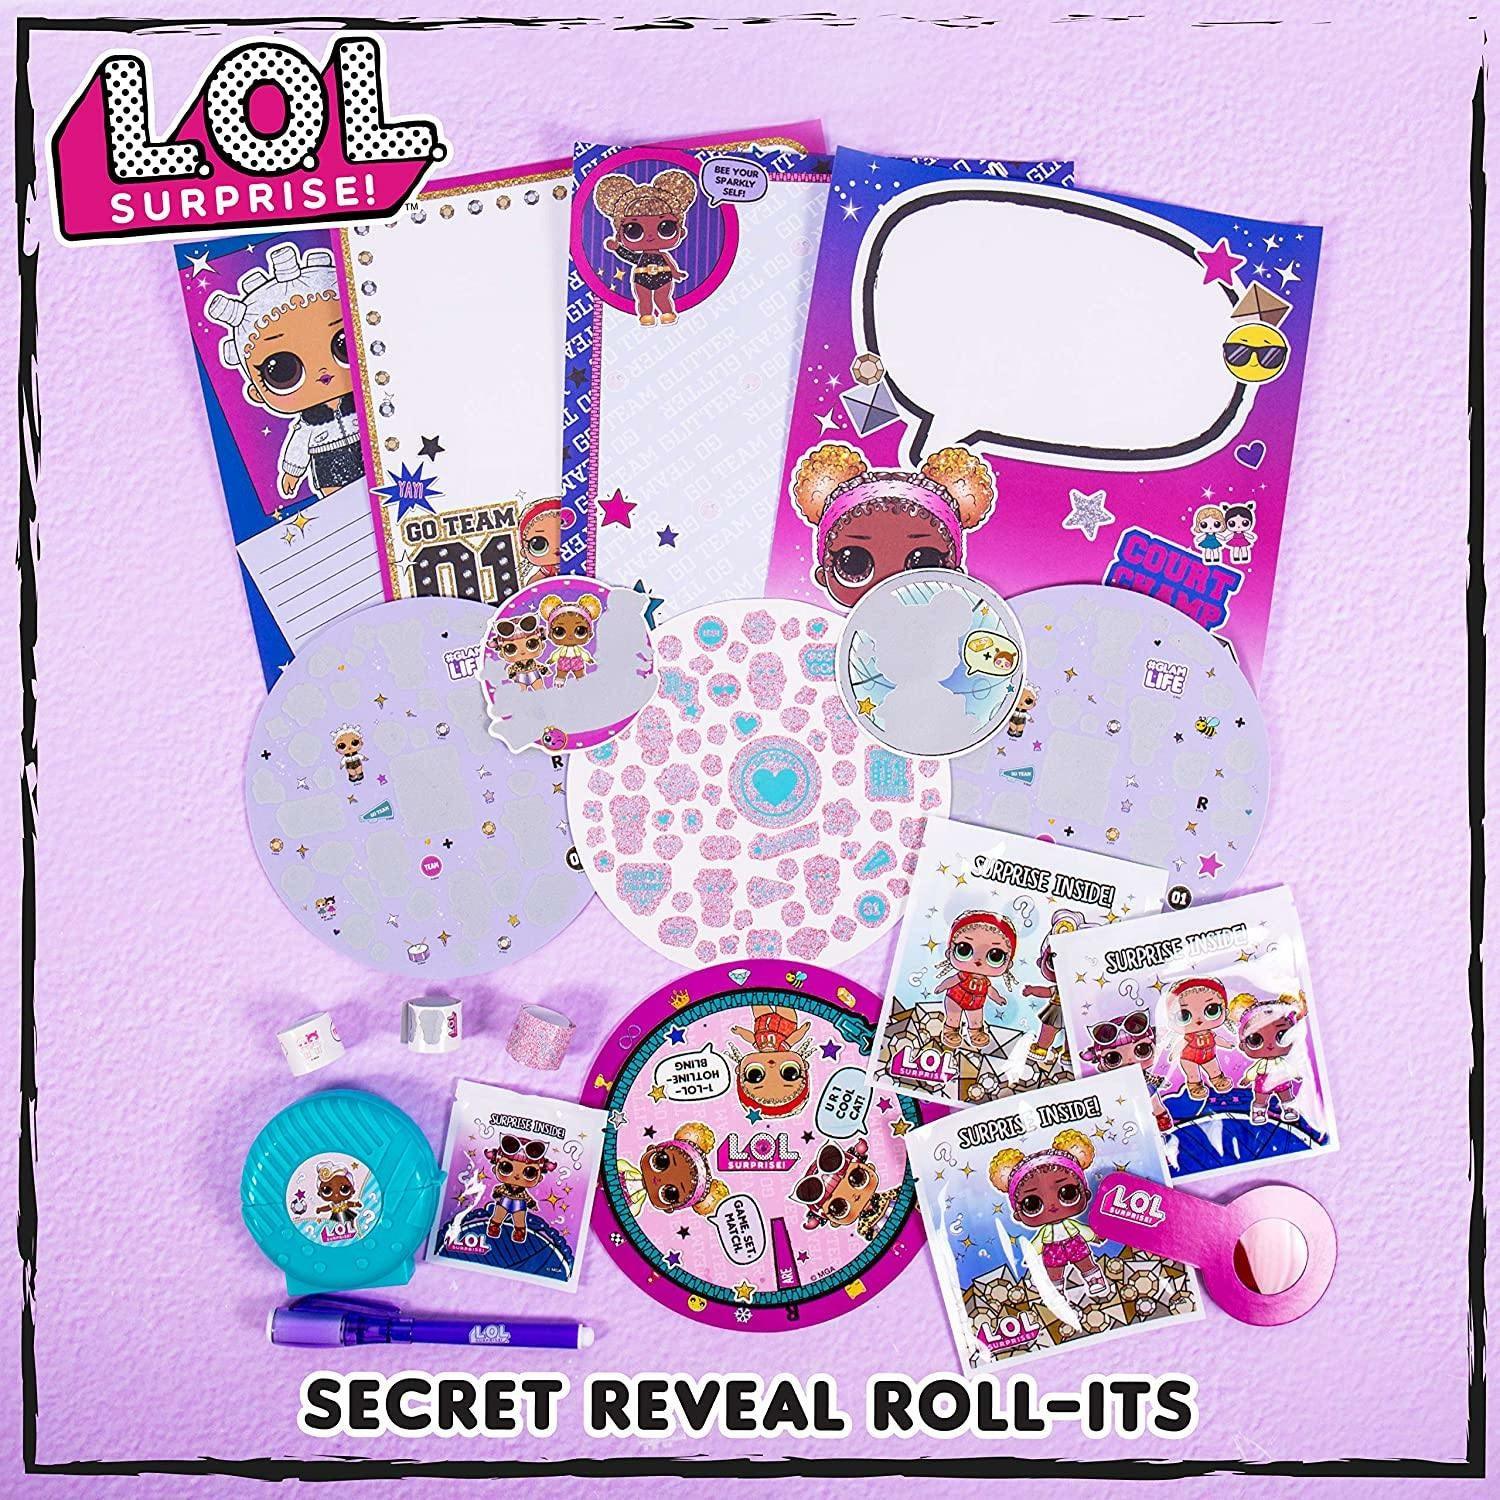 L.O.L Surprise Secret Reveal Roll-Its With 15 Surprises - BumbleToys - 5-7 Years, Amazon, Dolls, Fashion Dolls & Accessories, Girls, L.O.L